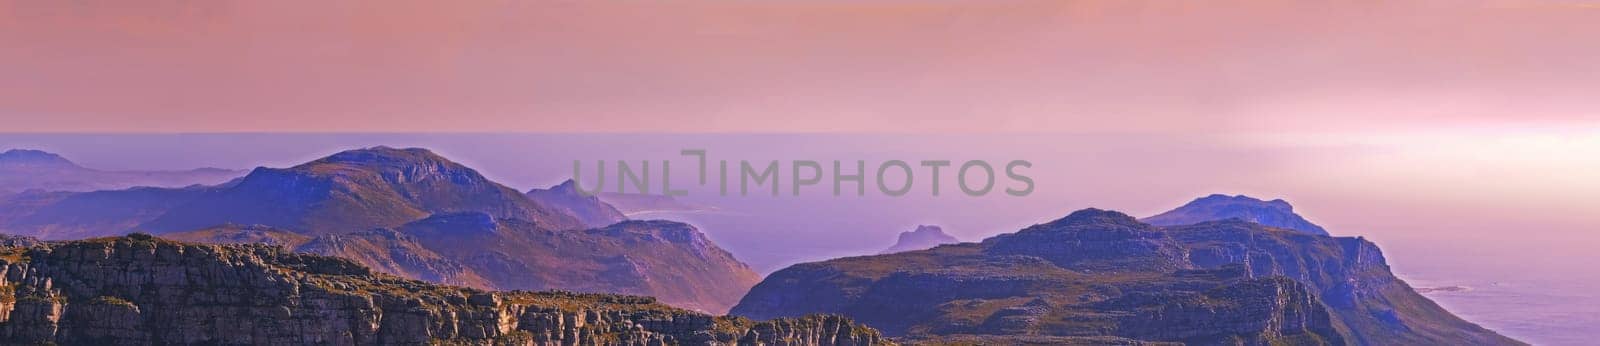 Scencic sunset seen from Table Mountain. A view from Table Mountain at sunset